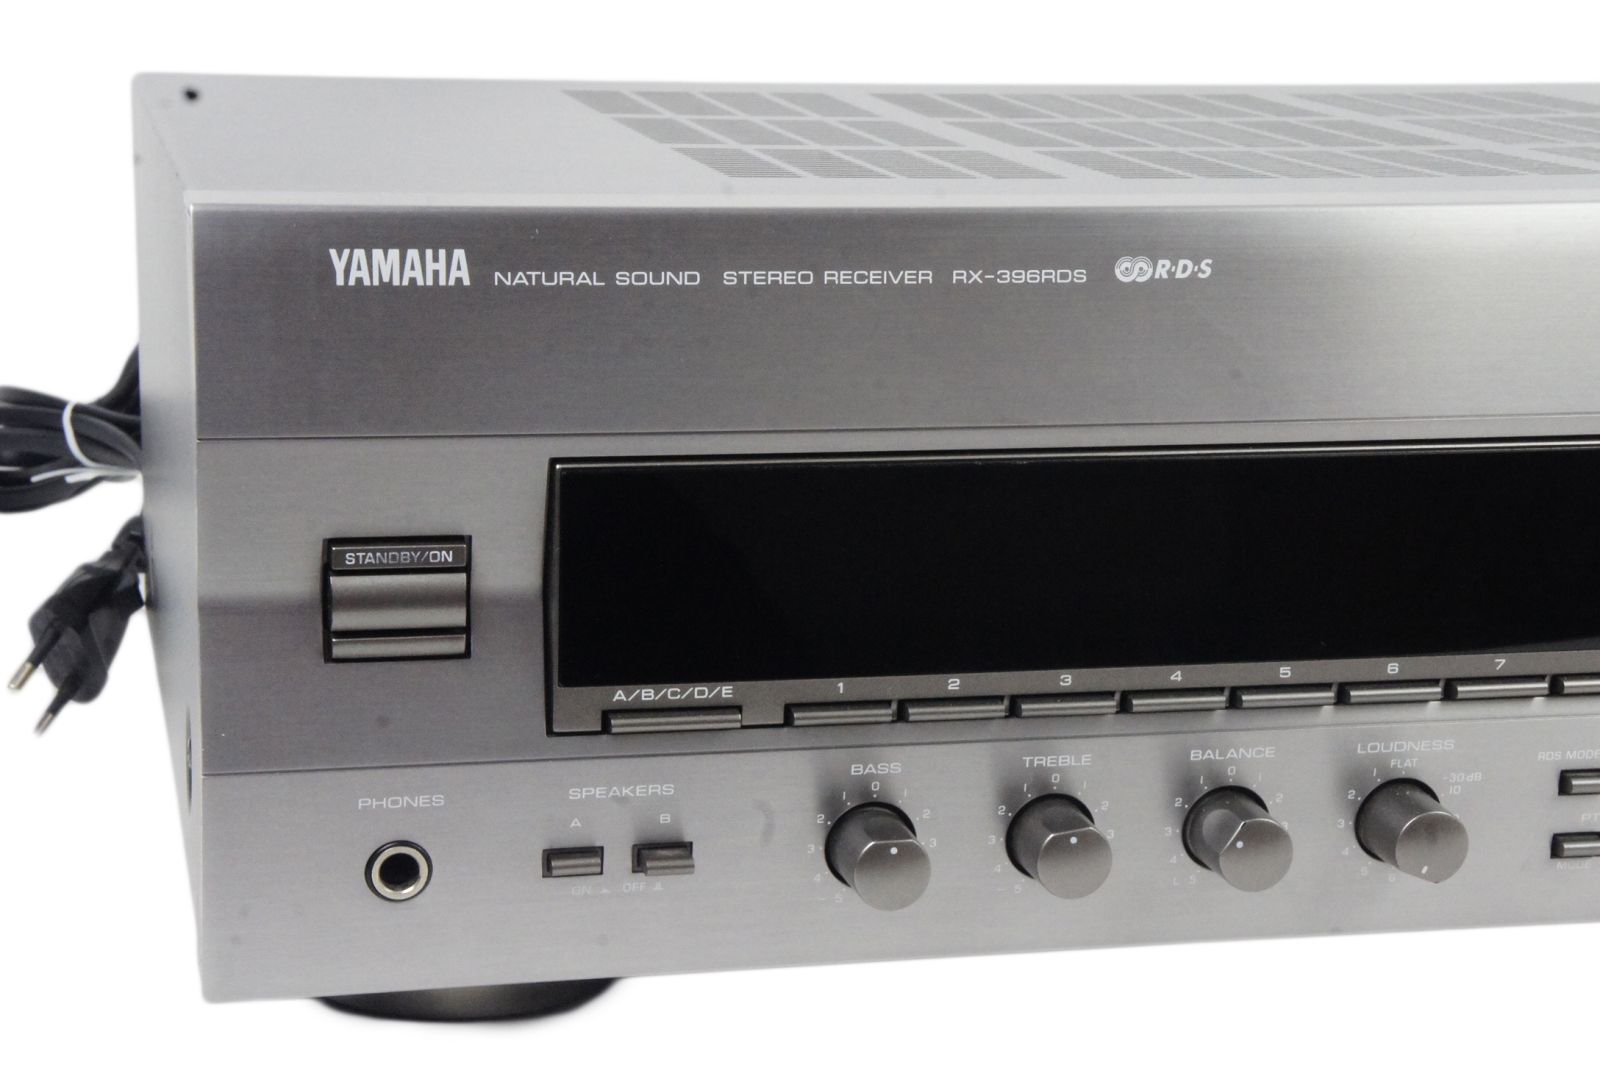 Yamaha_RX-396_RDS_Stereo_Receiver_04